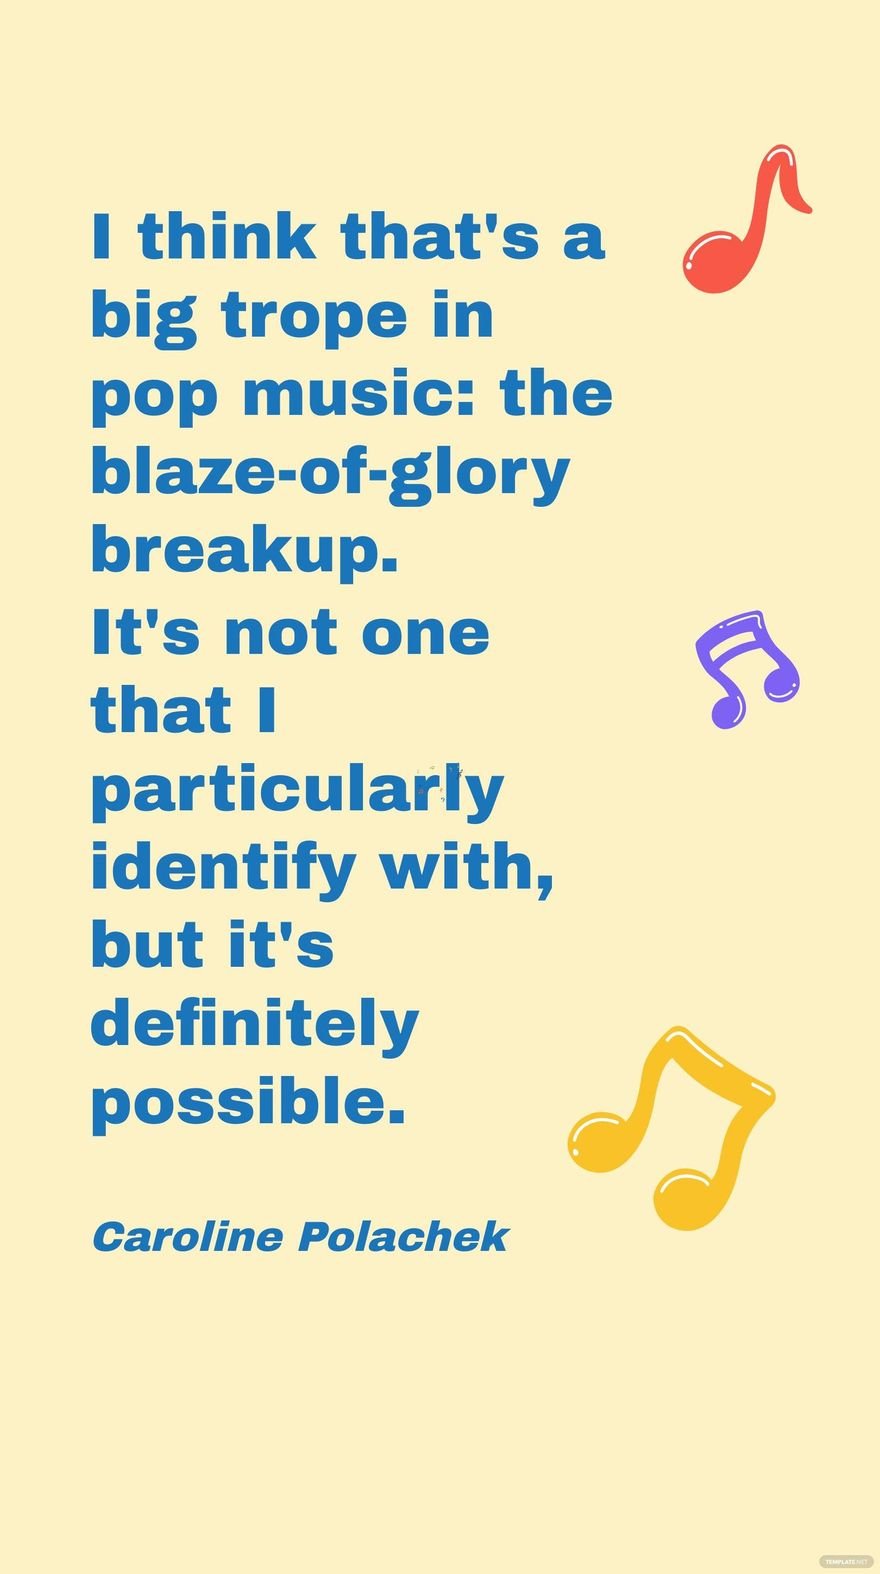 Free Caroline Polachek - I think that's a big trope in pop music: the blaze-of-glory breakup. It's not one that I particularly identify with, but it's definitely possible. in JPG